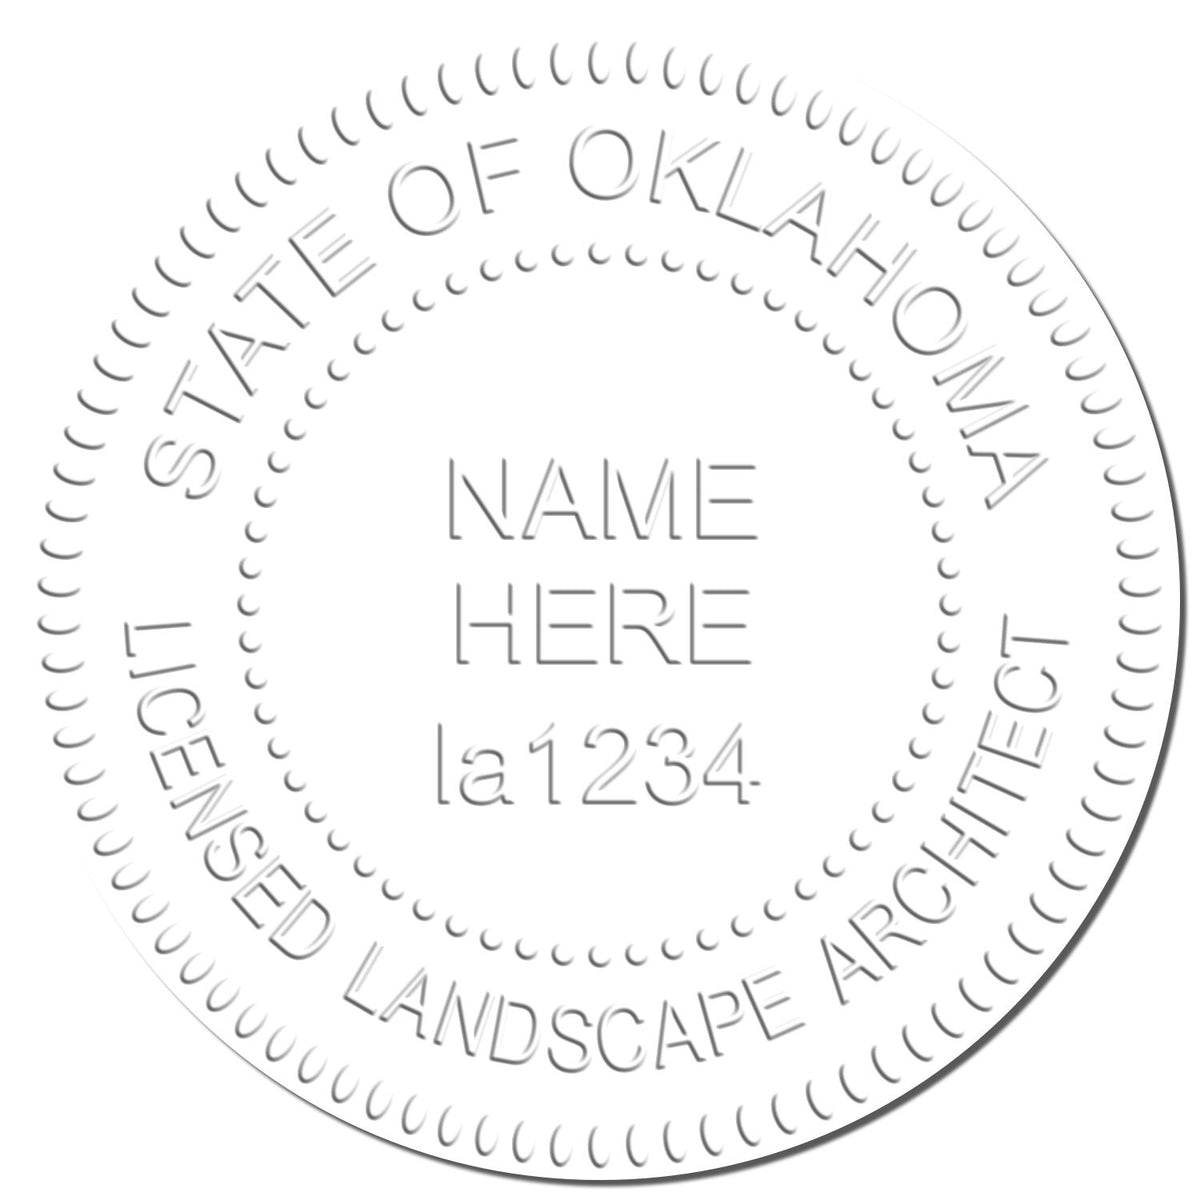 This paper is stamped with a sample imprint of the Hybrid Oklahoma Landscape Architect Seal, signifying its quality and reliability.